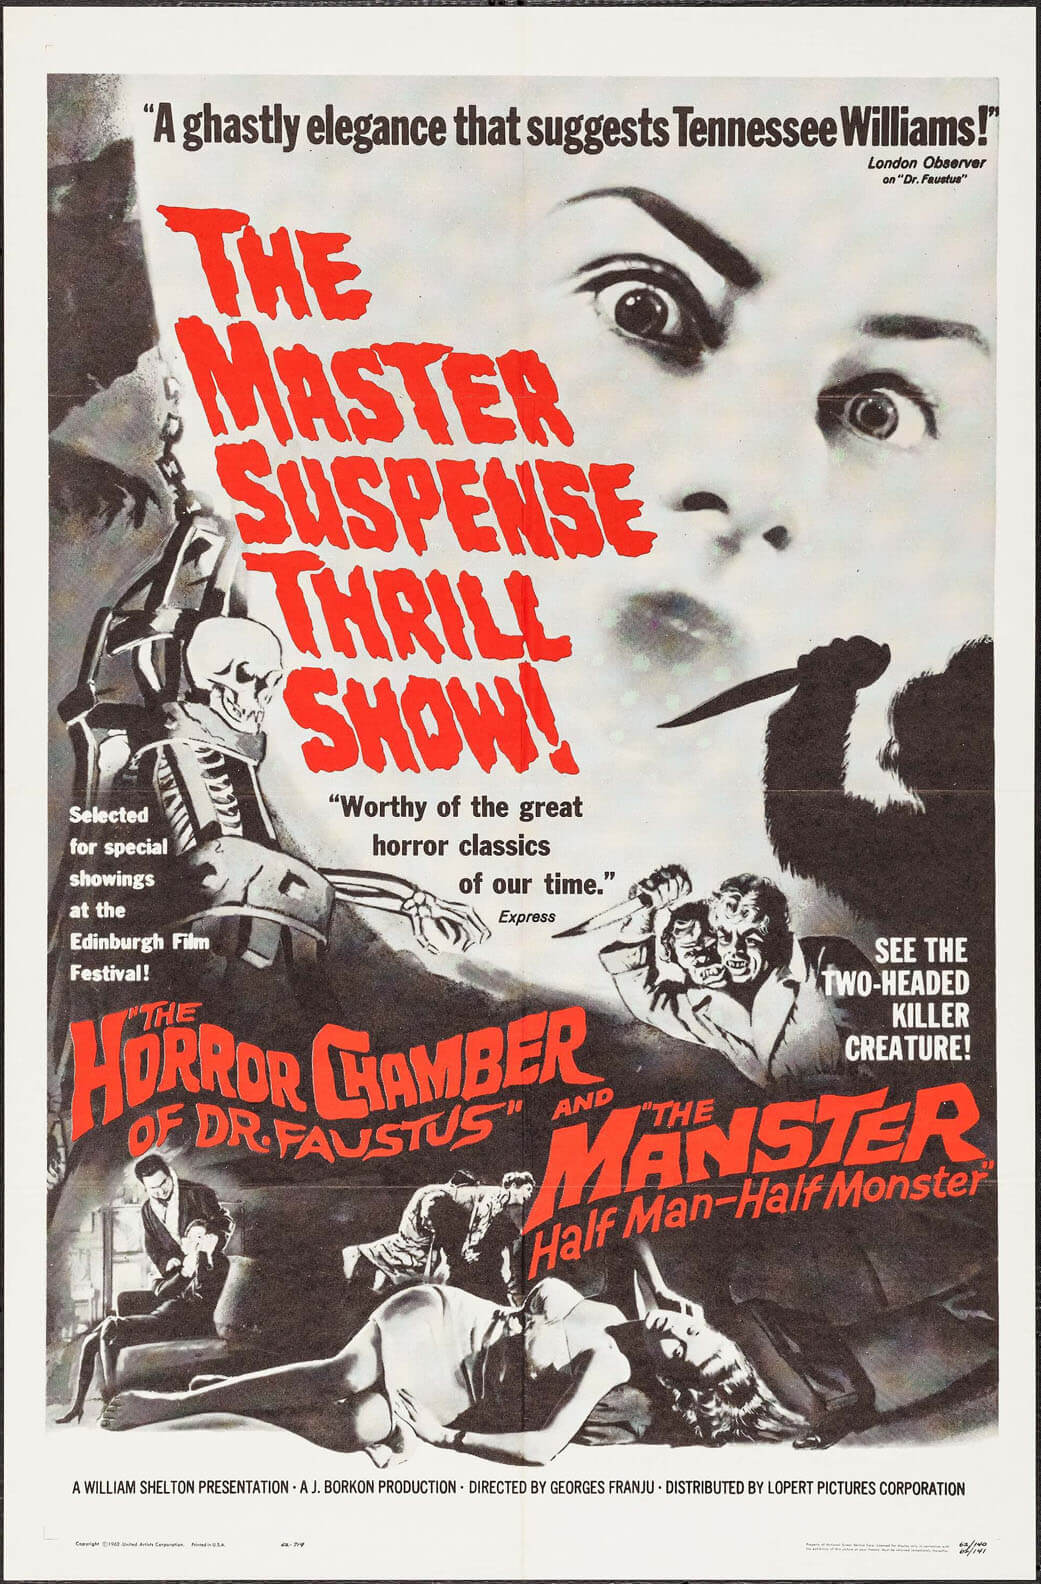 The Horror Chamber of Dr. Faustus | The Manster Combo